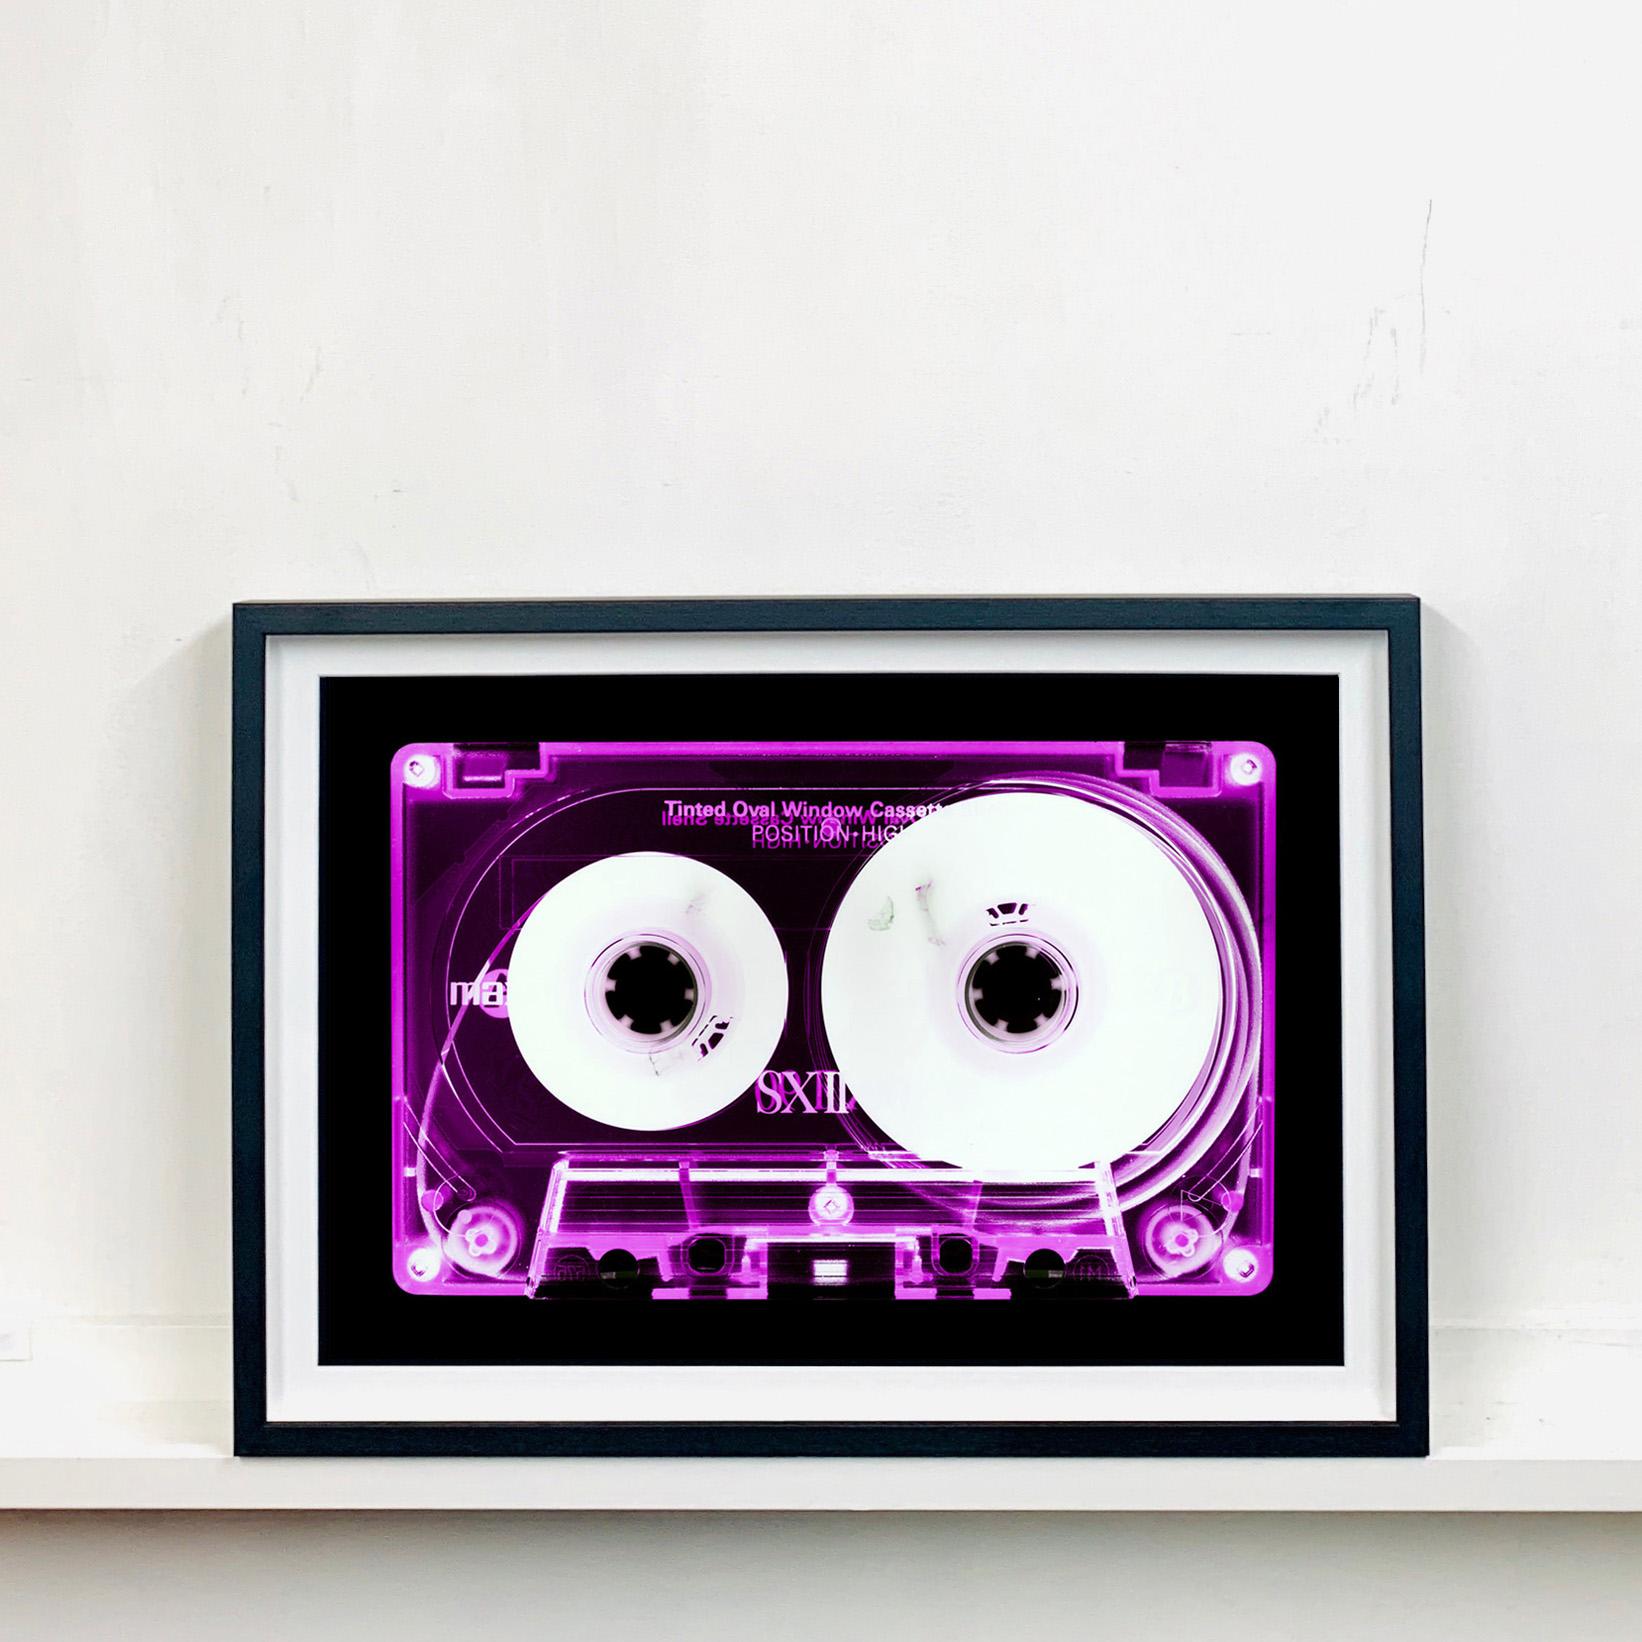 Tape Collection - Pink Tinted Cassette - Conceptual Color Music Pop Art - Print by Heidler & Heeps